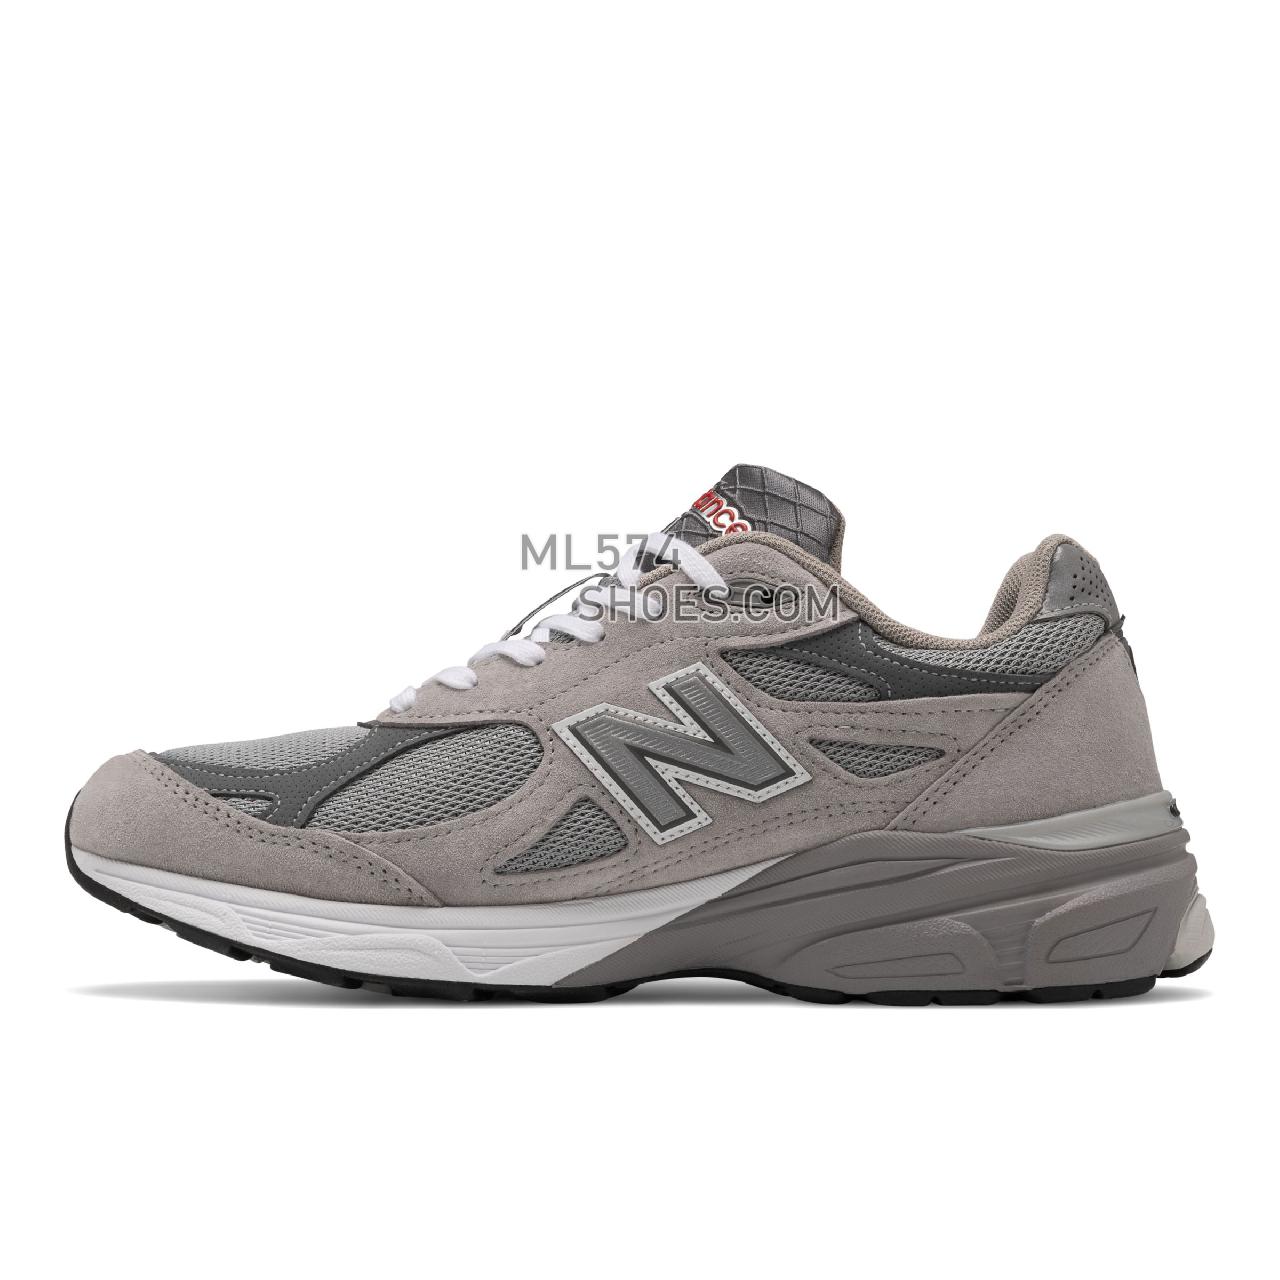 New Balance Made in USA 990v3 - Men's Made in USA And UK Sneakers - Grey with White - M990GY3